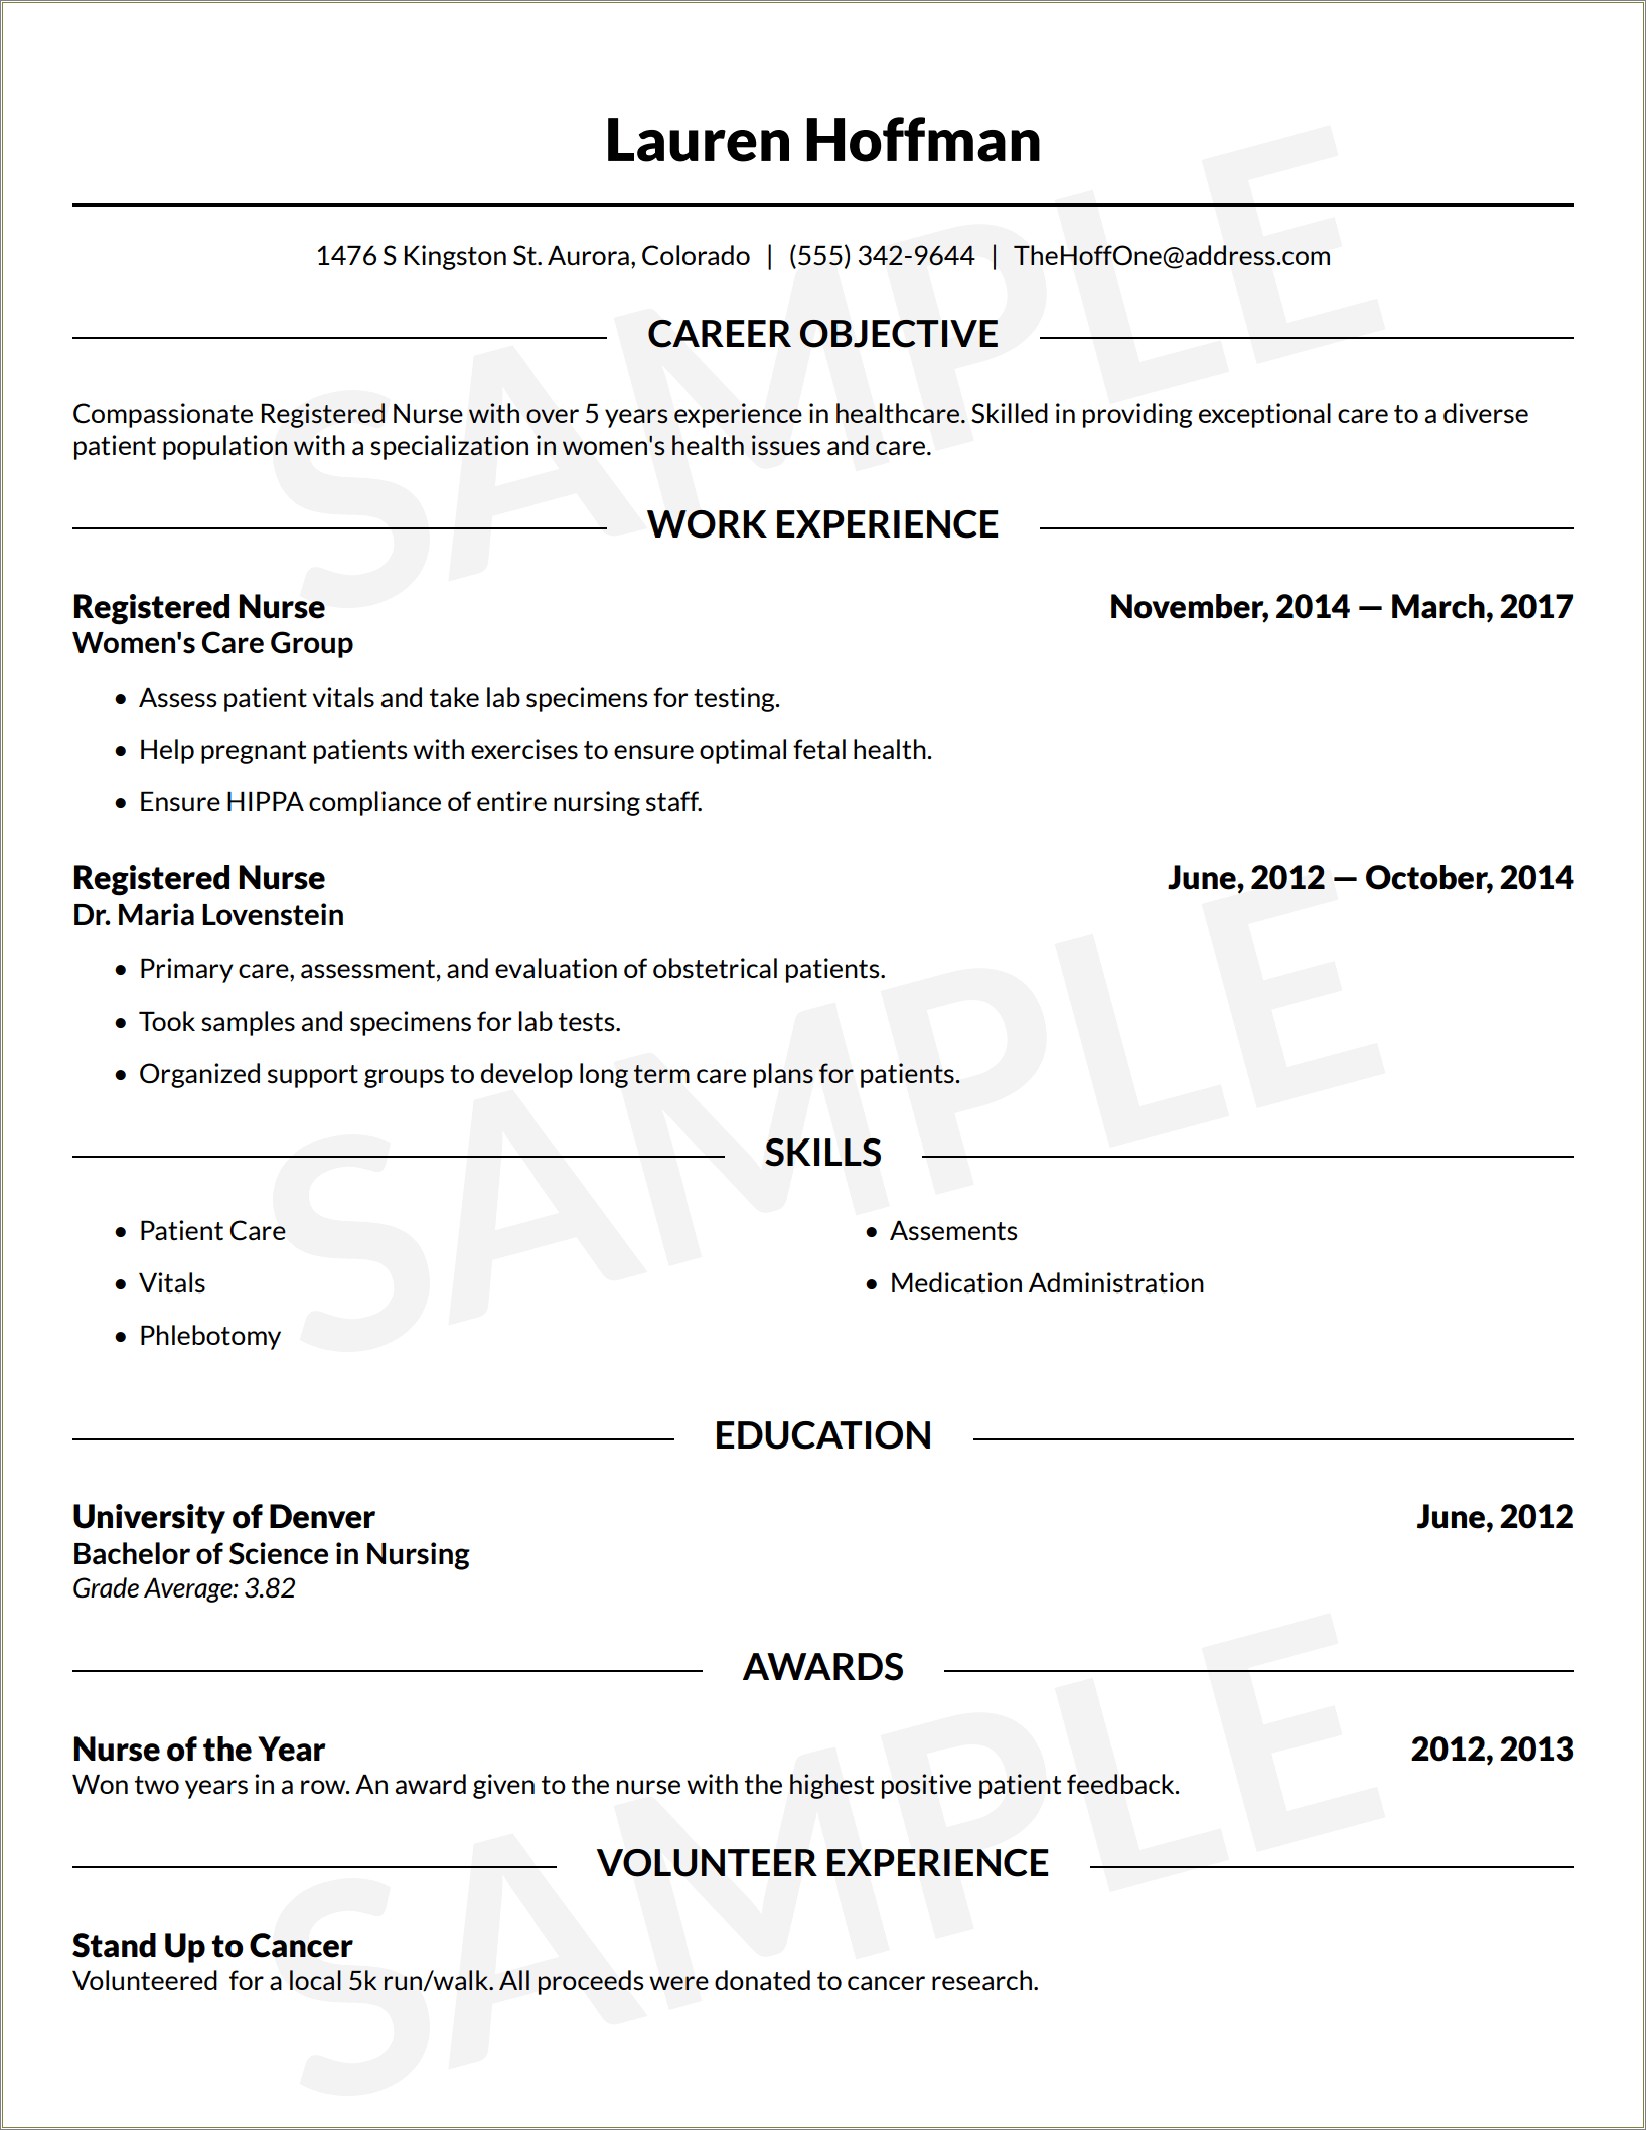 Where To Put Specialization In Resume